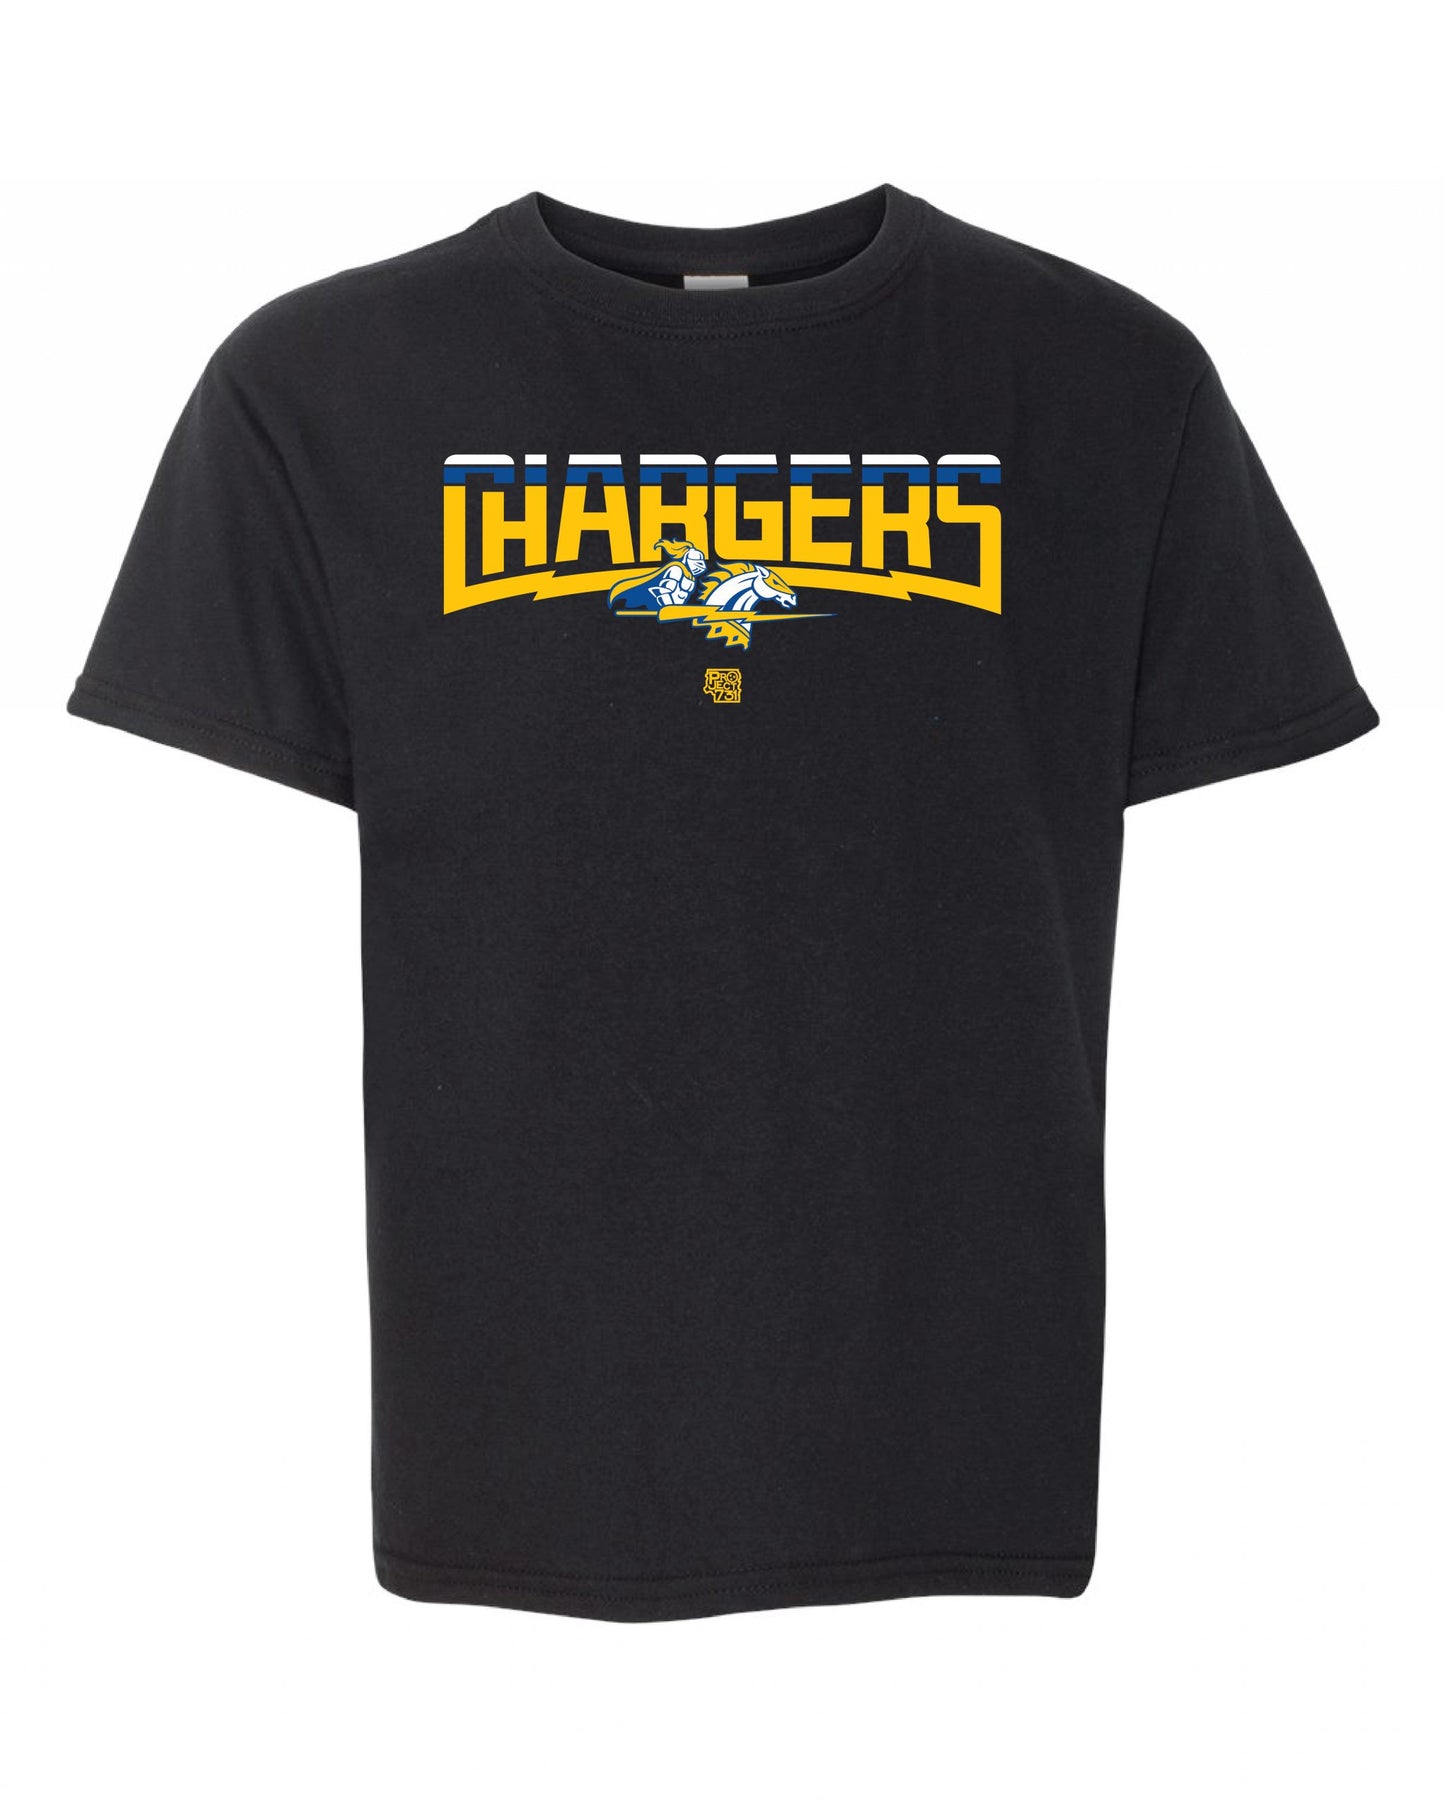 Charger Bolted Youth T-shirt